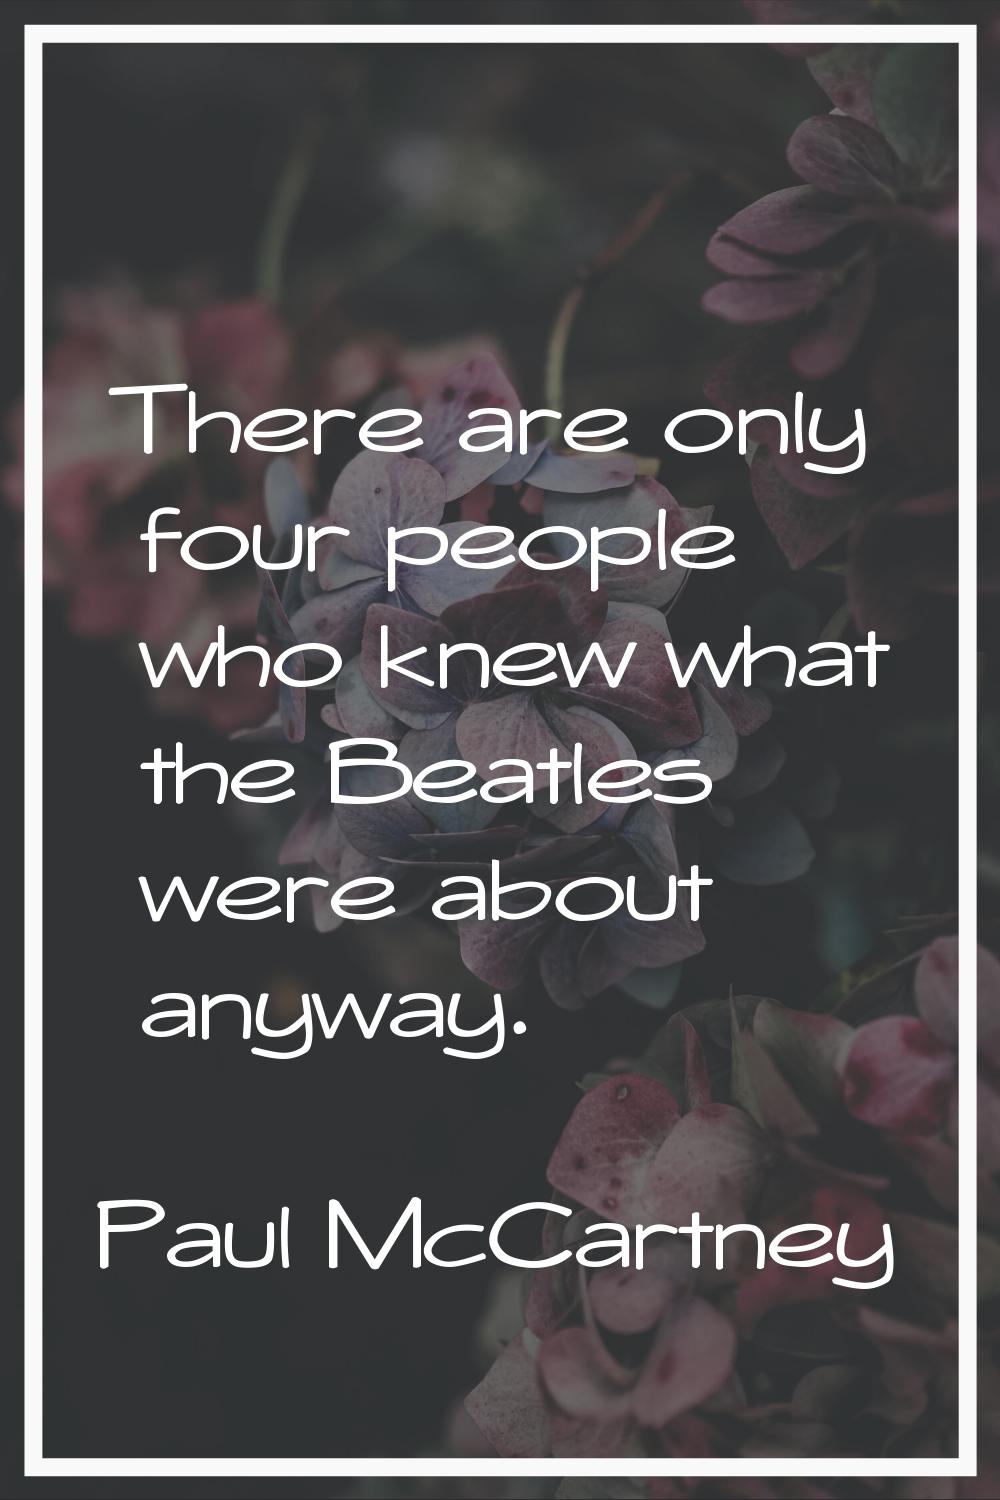 There are only four people who knew what the Beatles were about anyway.